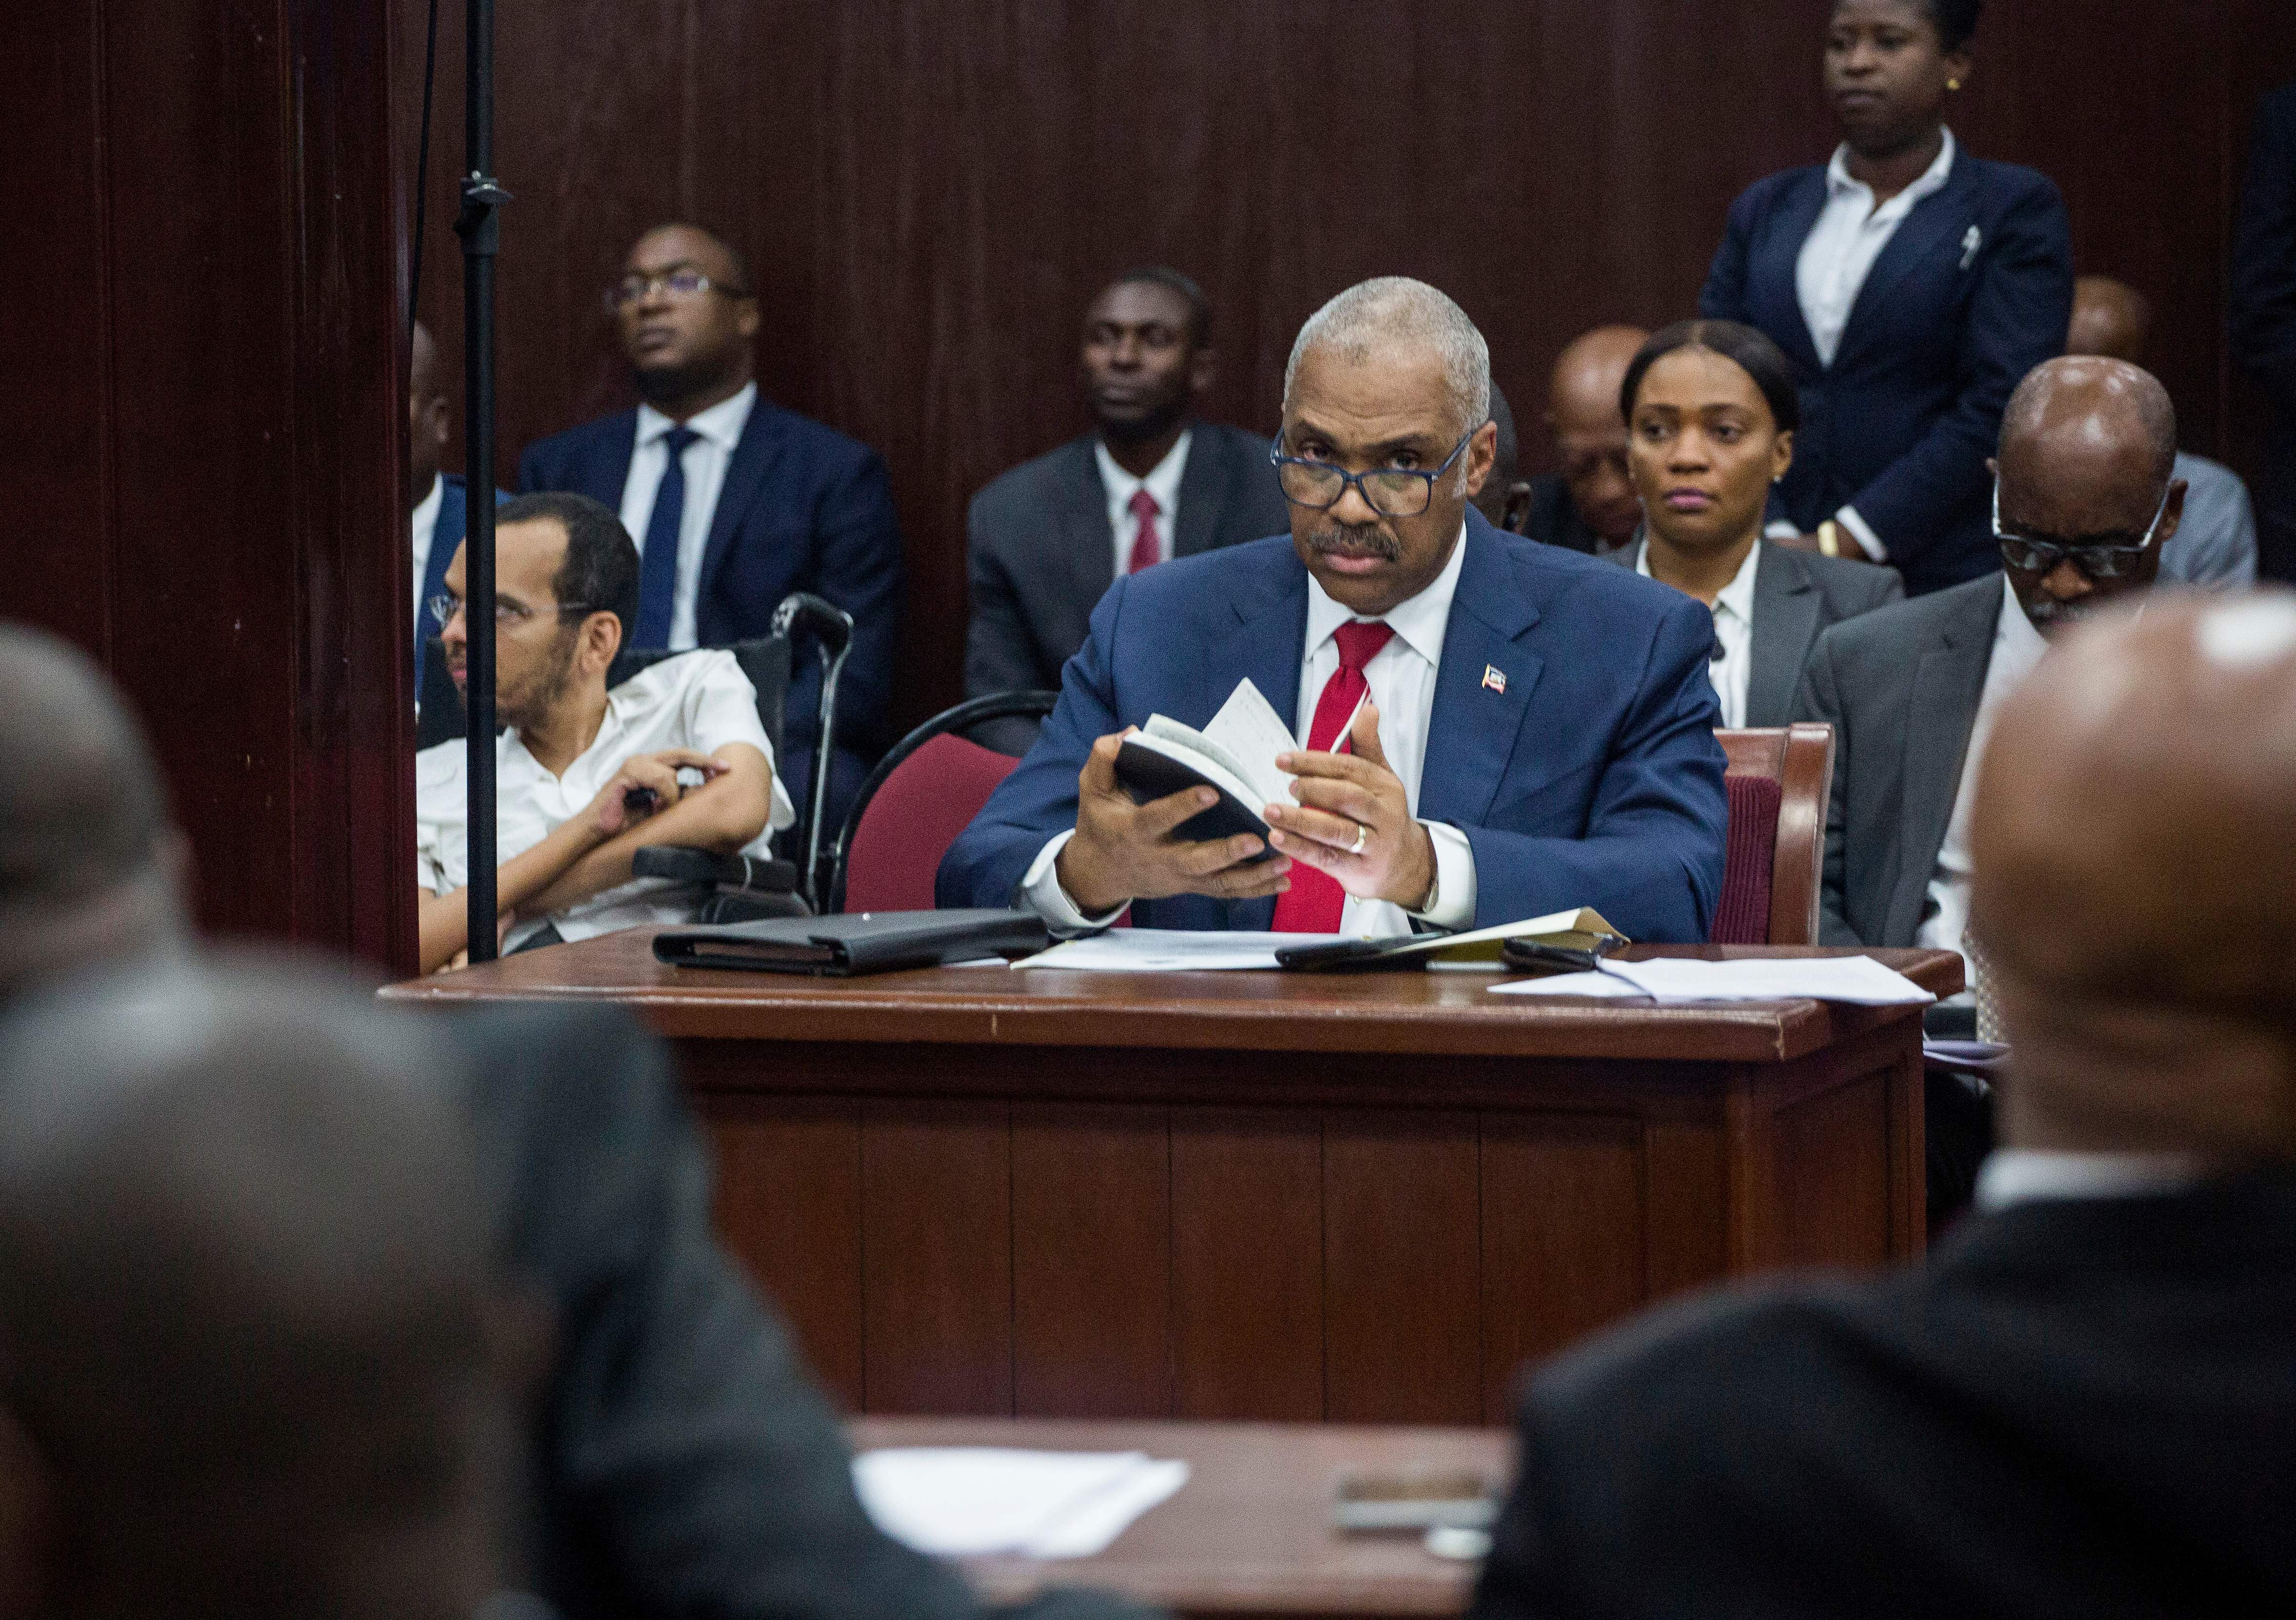 Prime Minister Jack Guy Lafontant in his place in Parliament for the interpellation session at the Chamber of Deputies in Port-au-Prince, Haiti, on July 14, 2018. (PIERRE MICHEL JEAN&mdash;AFP/Getty Images)